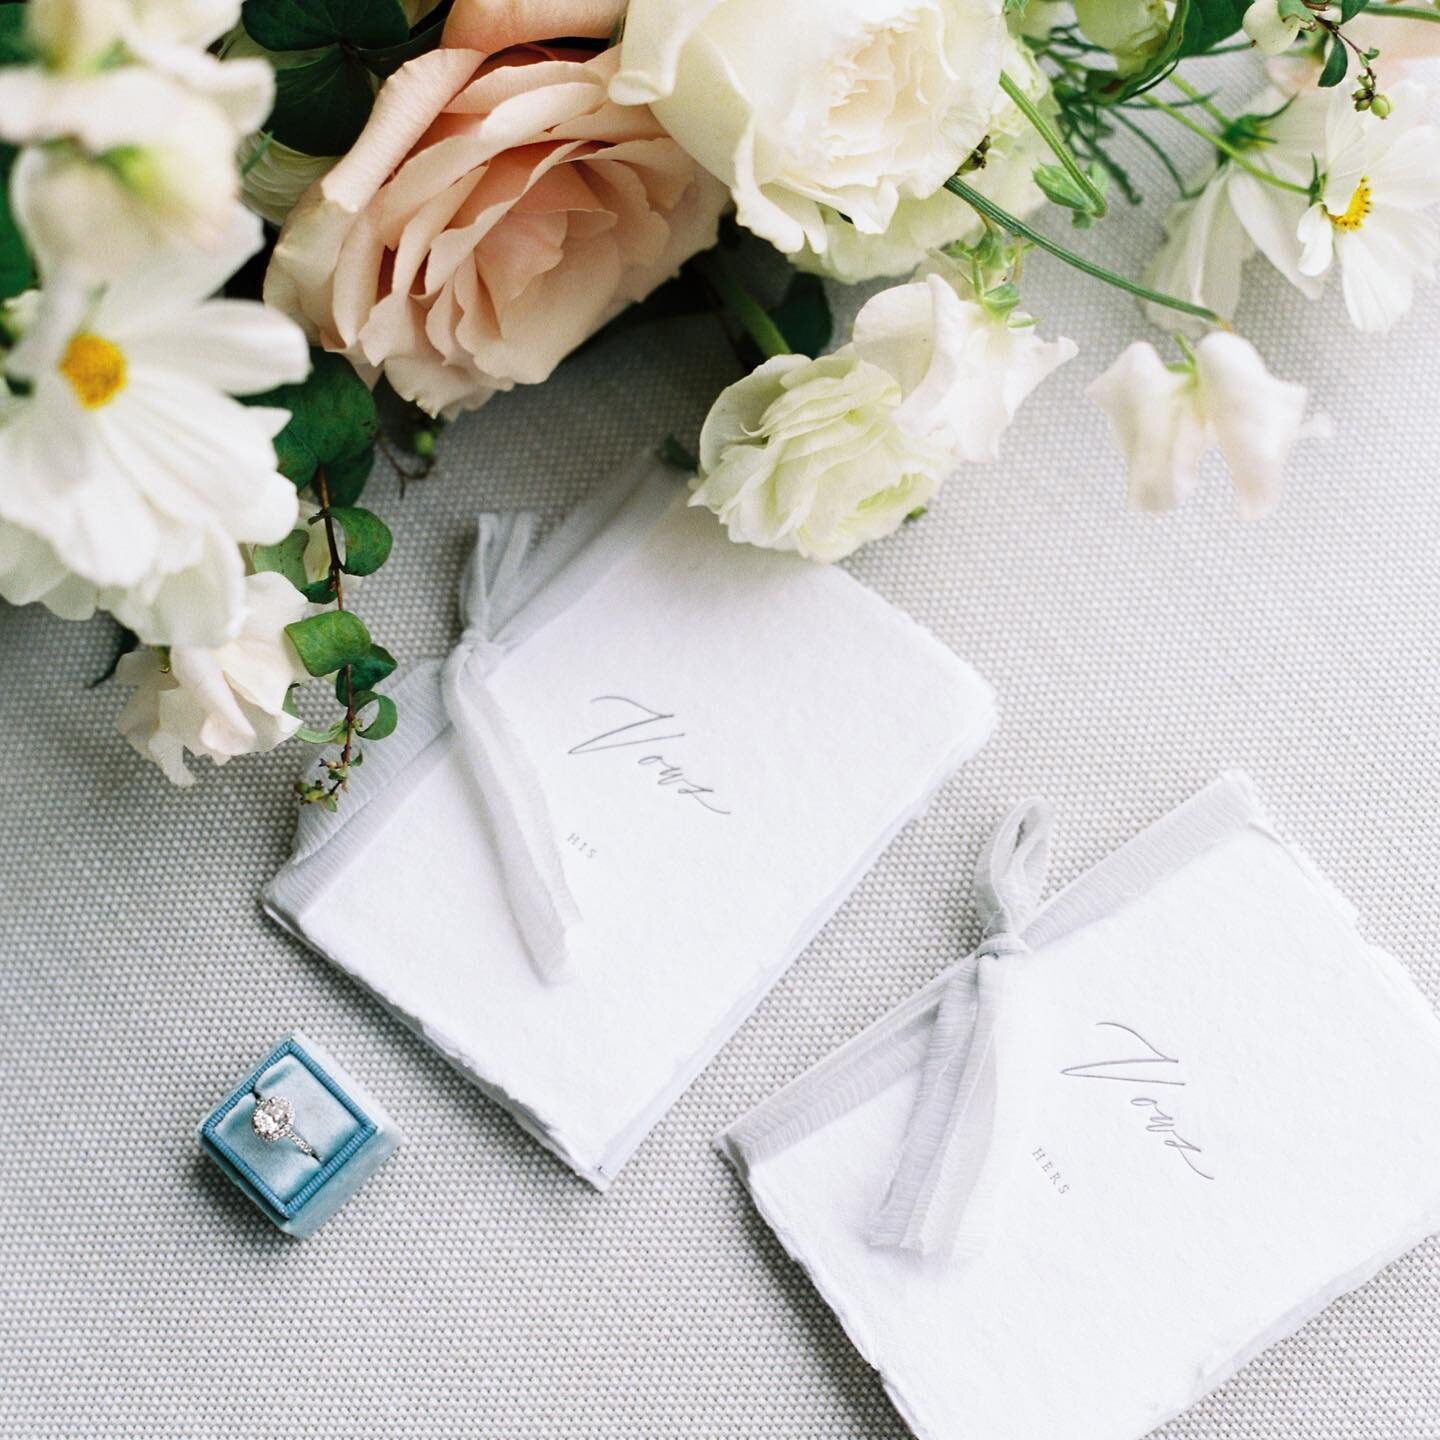 { vow books- what are they and do you need them? }

Vow books are typically made by your calligrapher or graphic designer for you to have to hold during the vow portion of your ceremony. They are not necessary but are a nice touch. 

- Ideal for if y